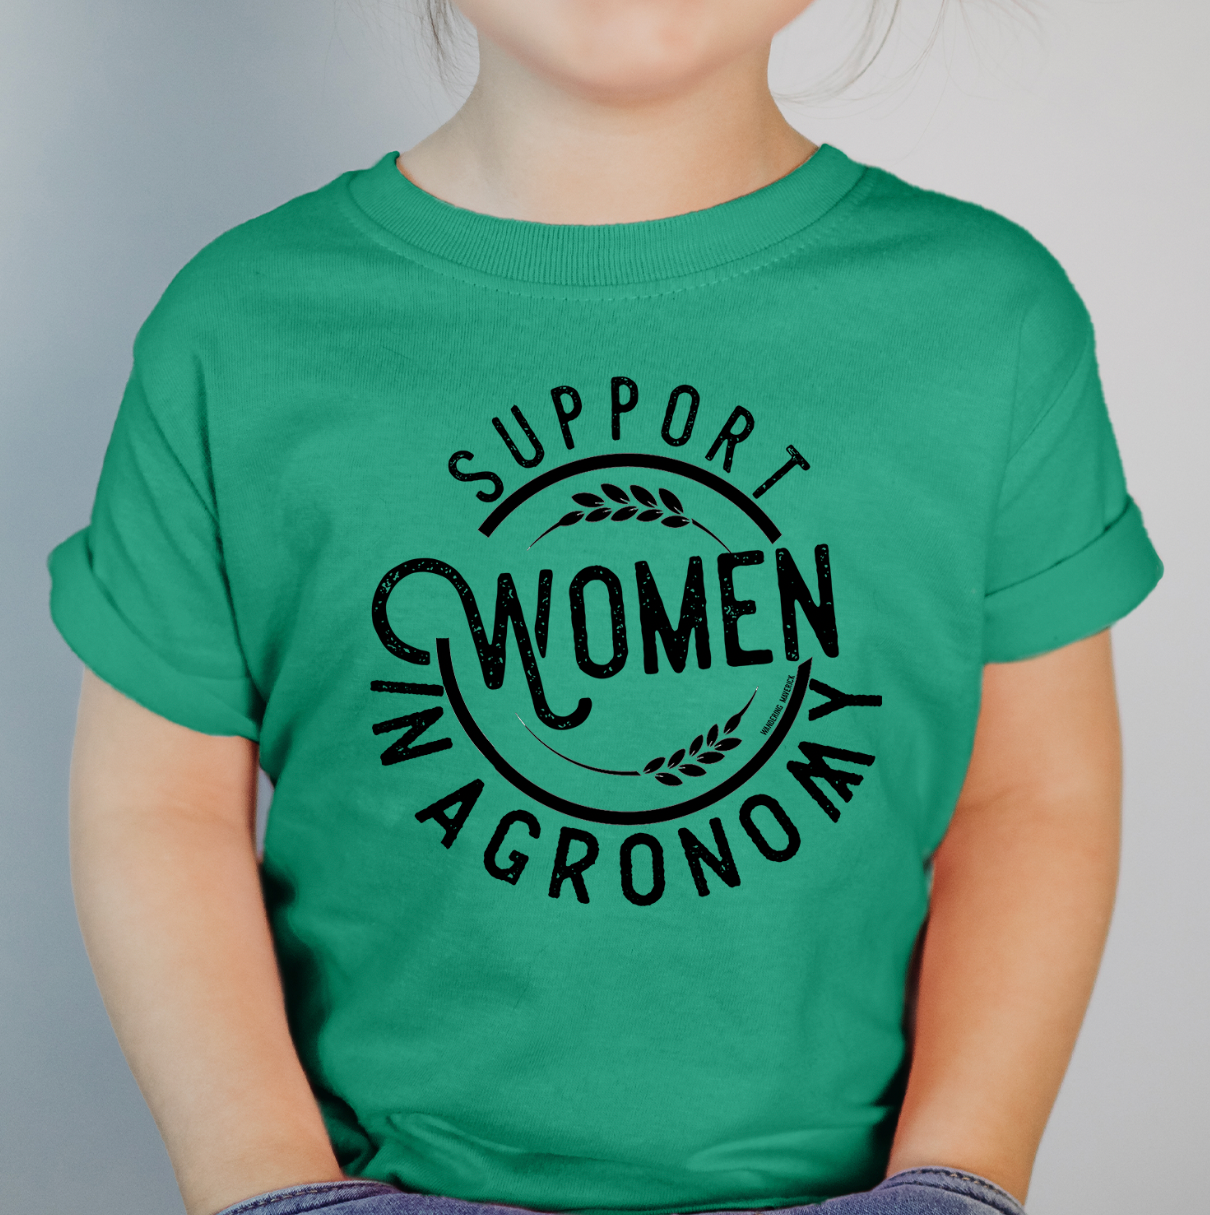 Support Women In Agronomy One Piece/T-Shirt (Newborn - Youth XL) - Multiple Colors!